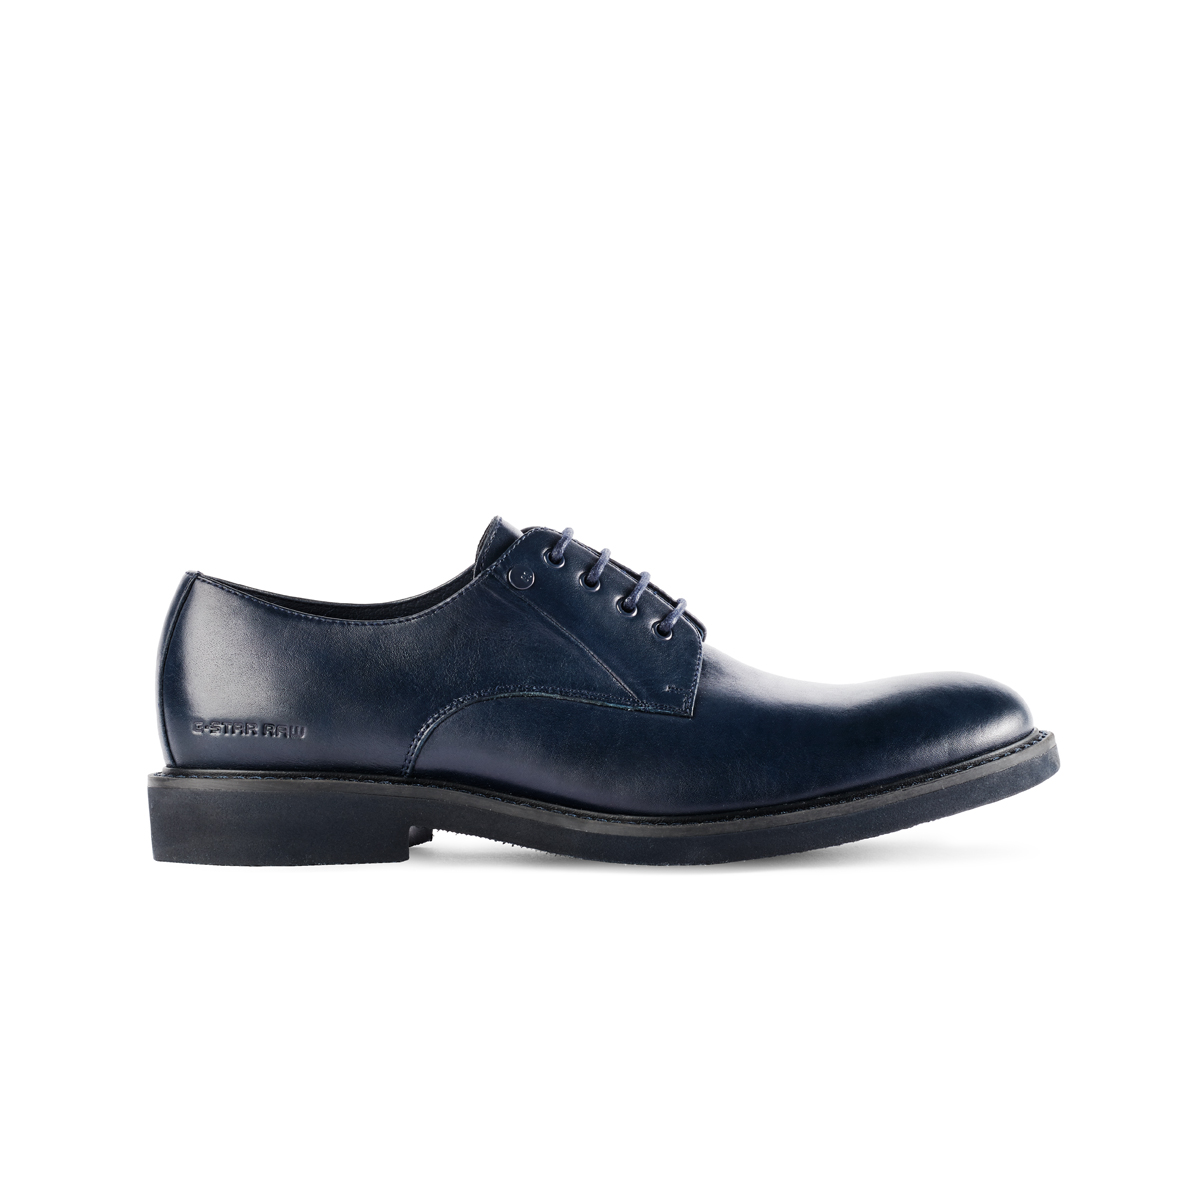 g star raw sale shoes